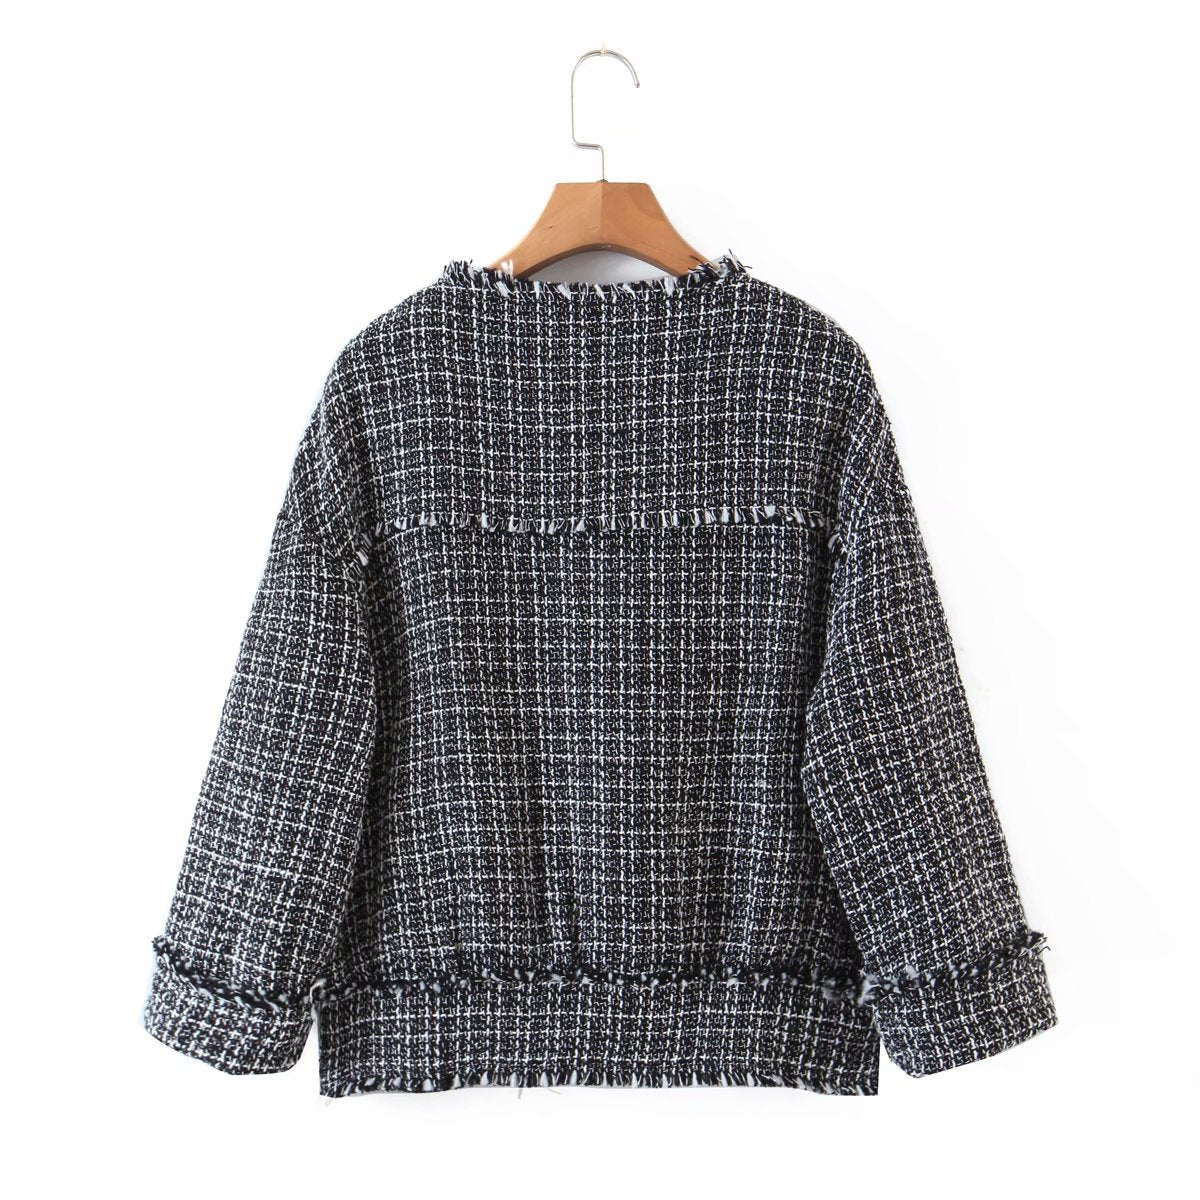 autumn woollen sweater for women with short, fringed cardigan  1386